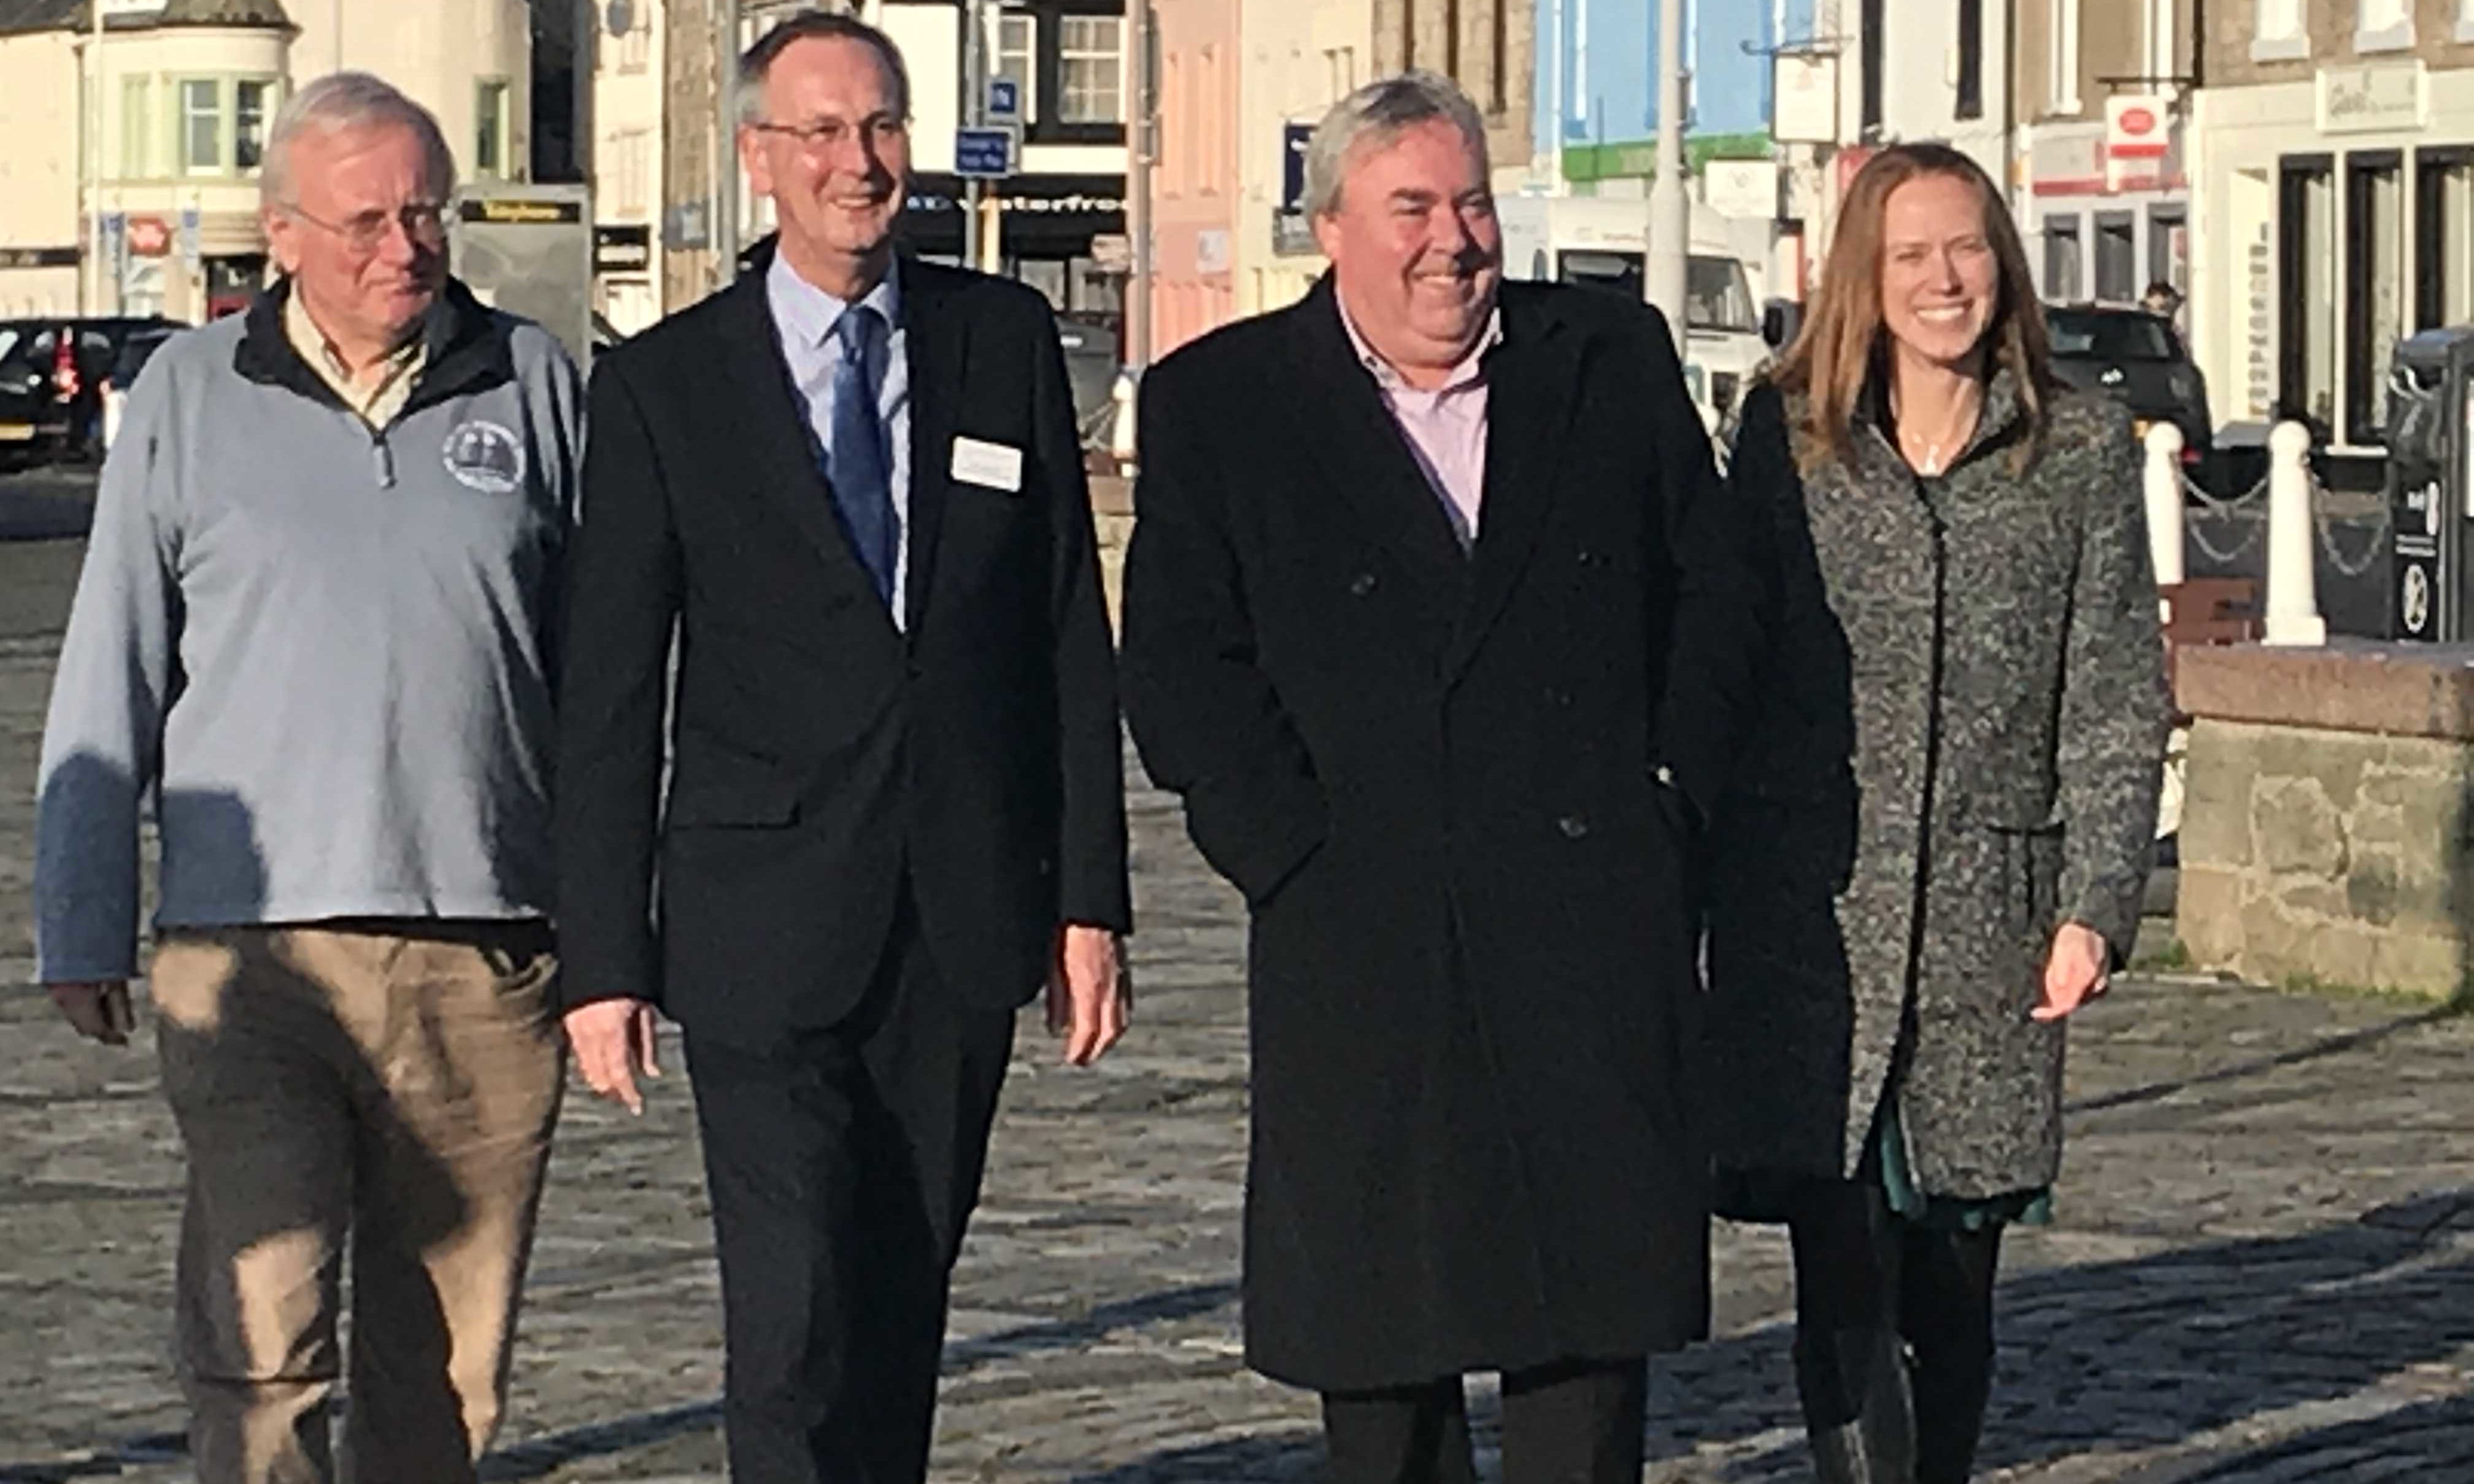 Visit Scotland chief executive Malcolm Roughead (second right) with tourism official Caroline Warburton and Scotish Fisheries Museum representatives